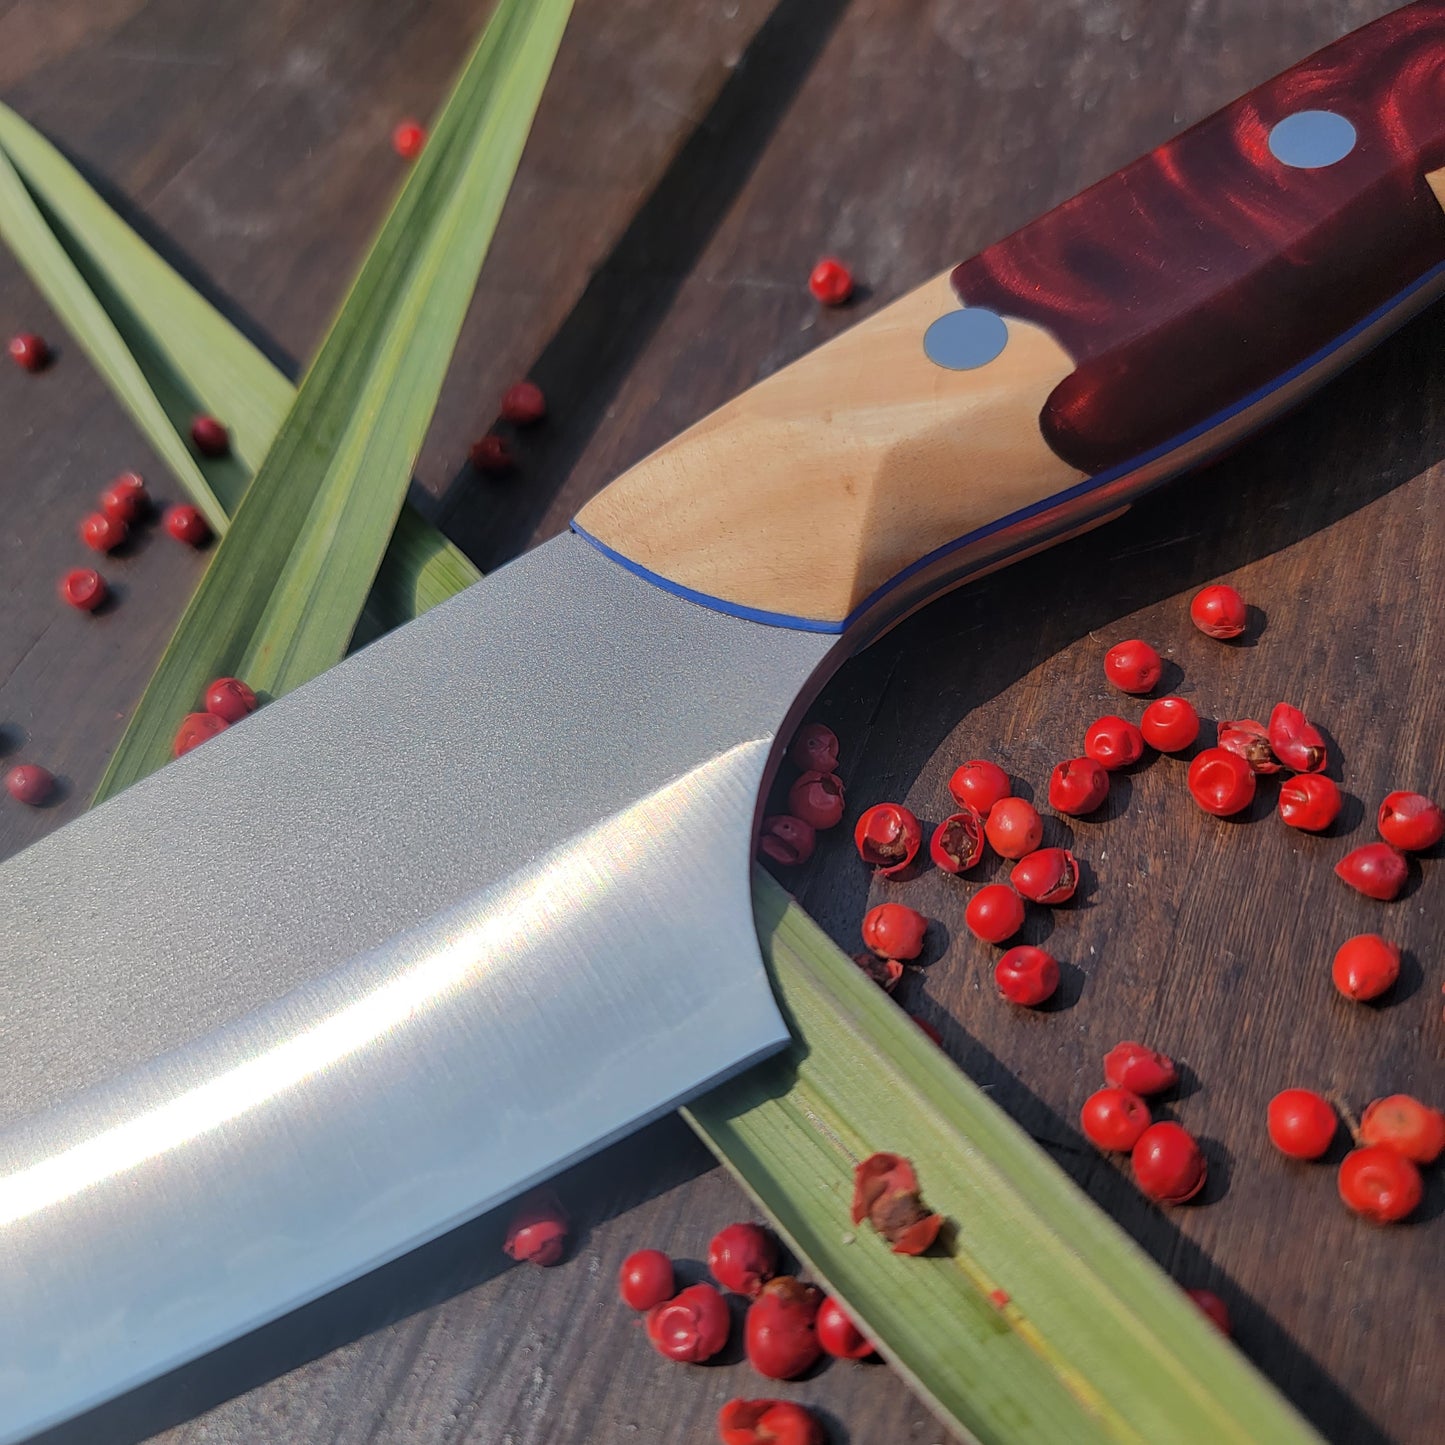 Big Red with "Red Earth" handle